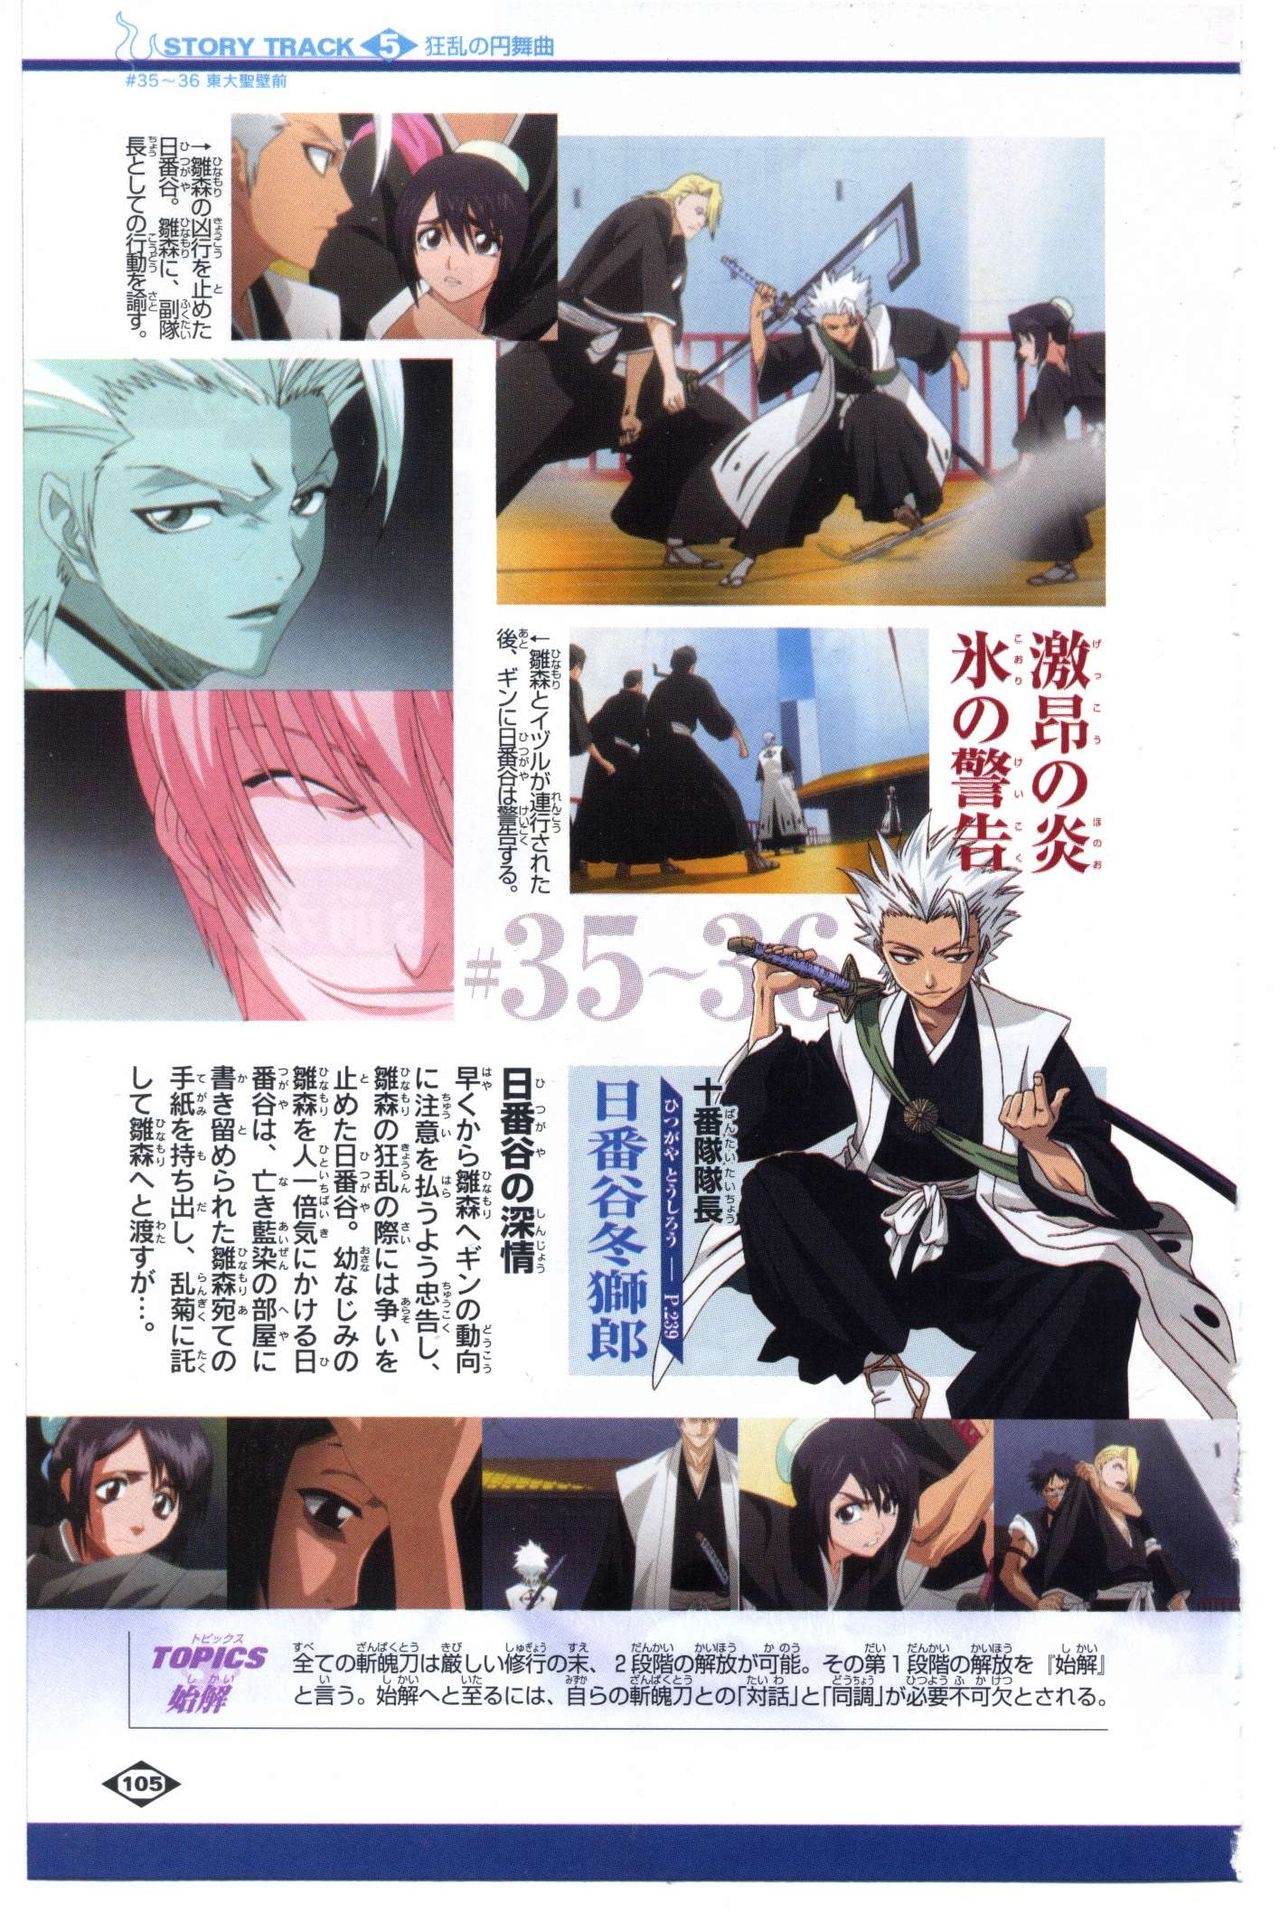 Bleach: Official Animation Book VIBEs 105